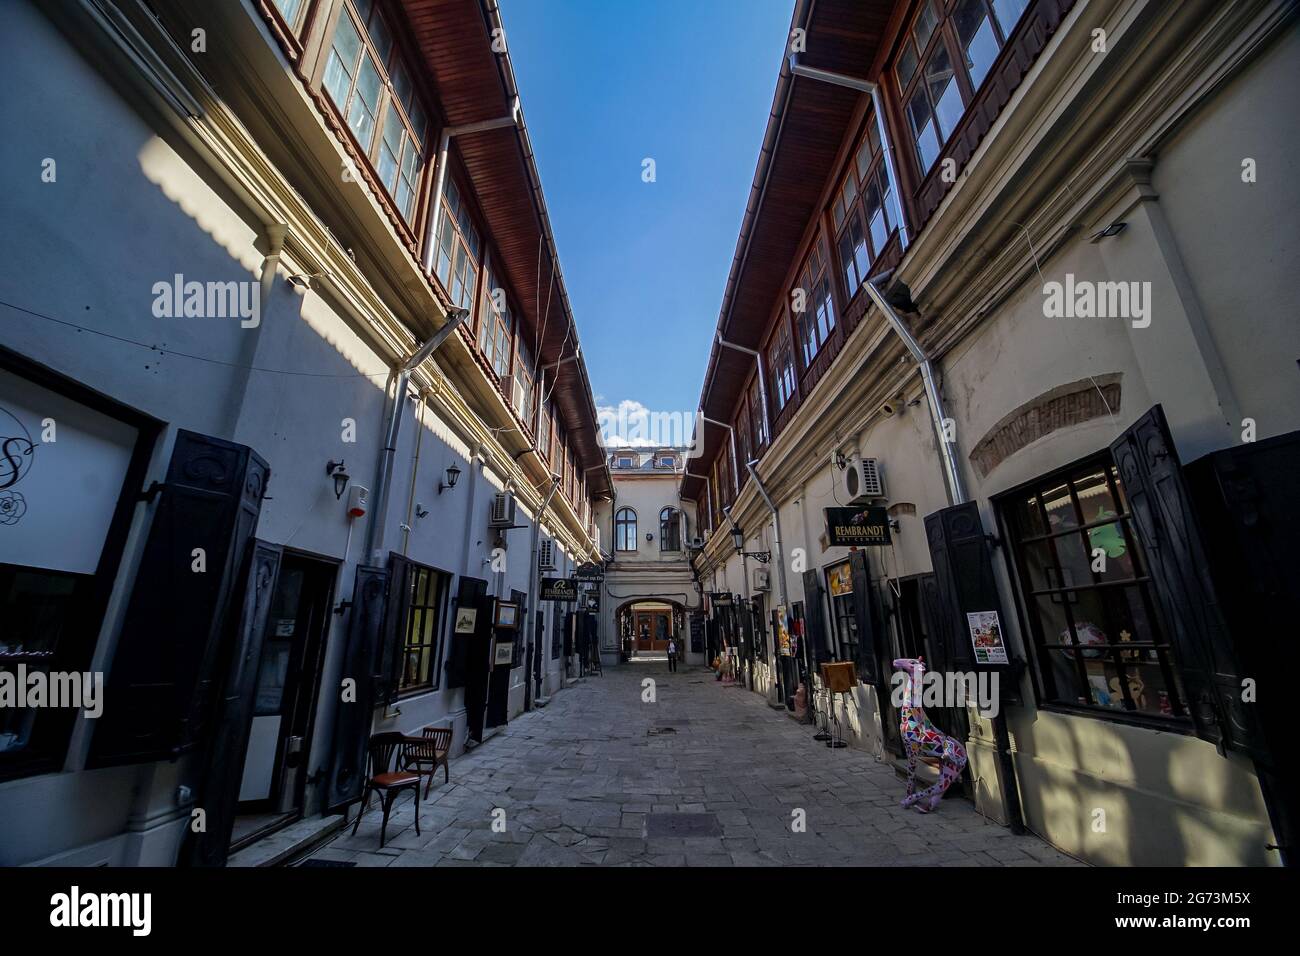 Bucharest, Romania - July 08, 2021: 'Hanul cu tei', built in 1833, which in the past it was an inn now is a place with small shops and art galleries, Stock Photo